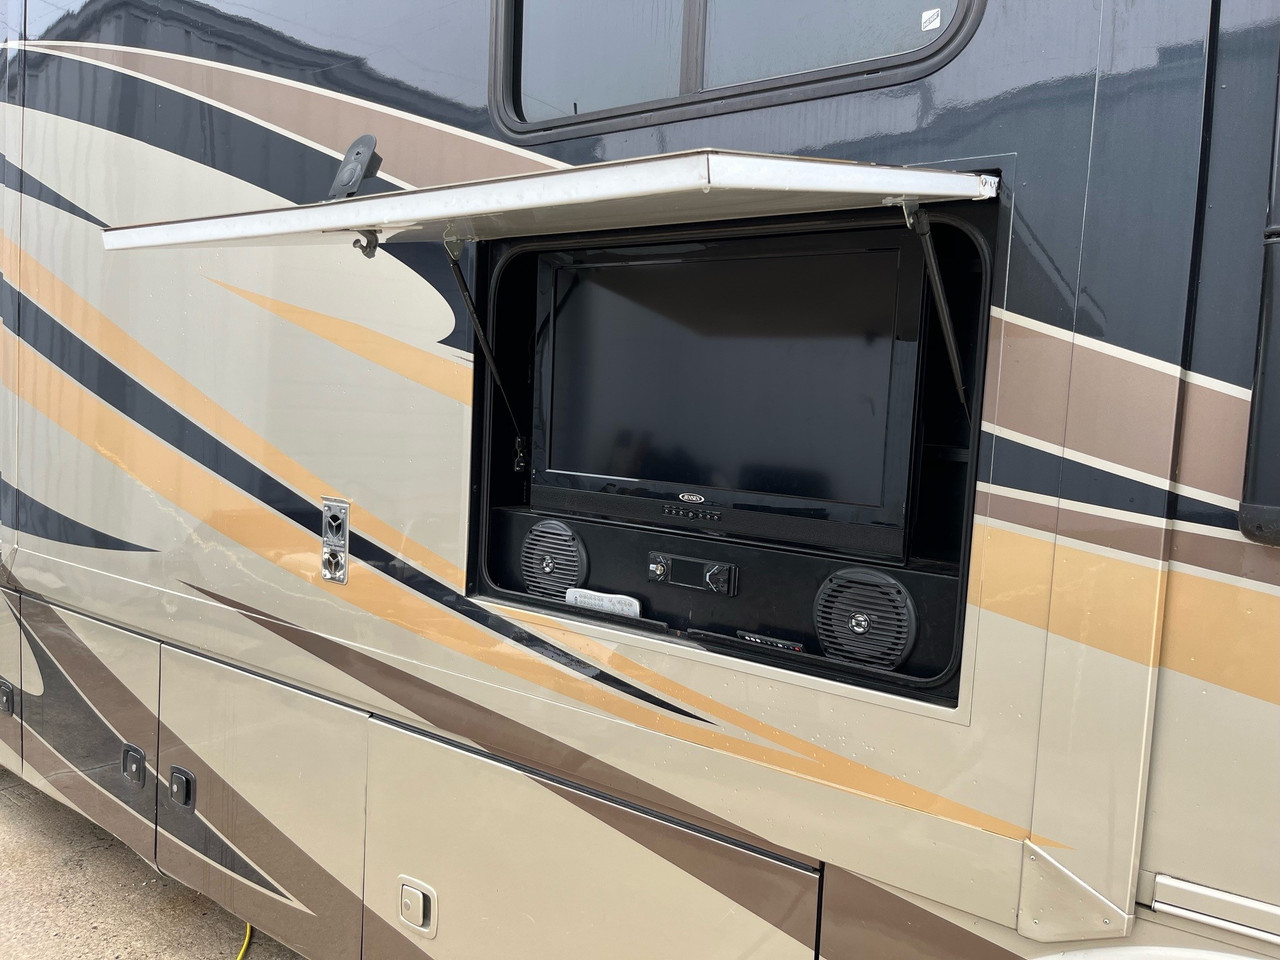 2014 Forest River Berkshire 390BH